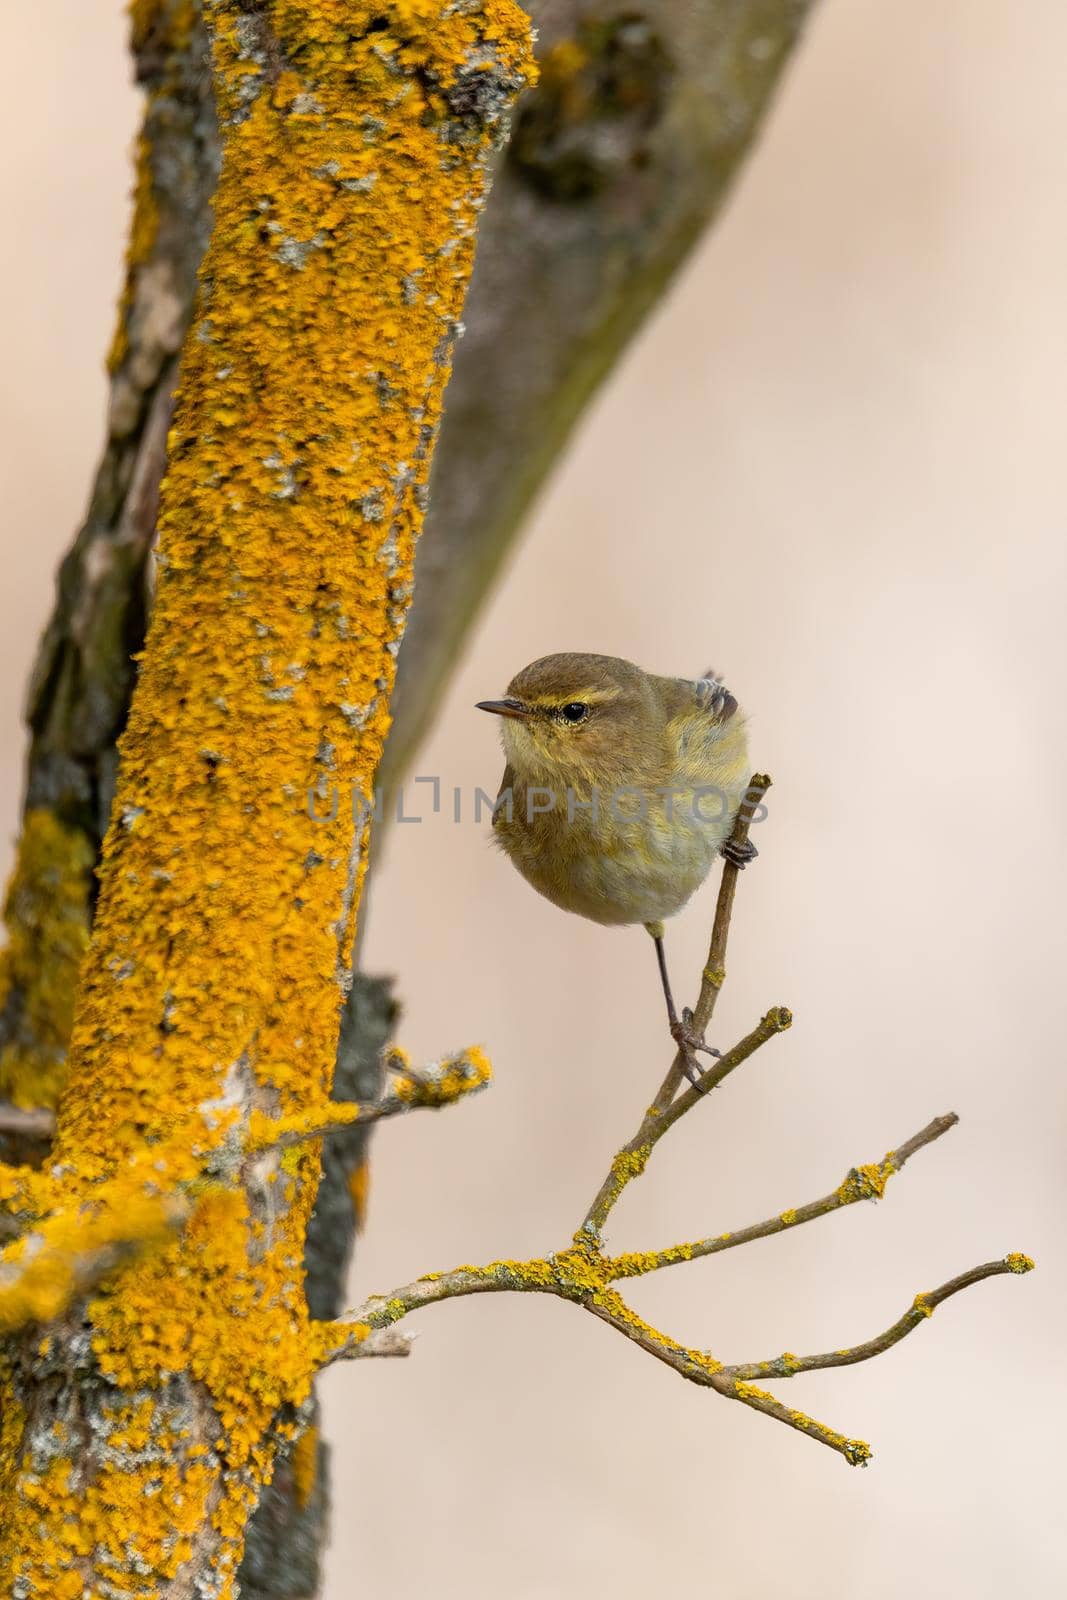 small song bird Willow Warbler, Europe wildlife by artush